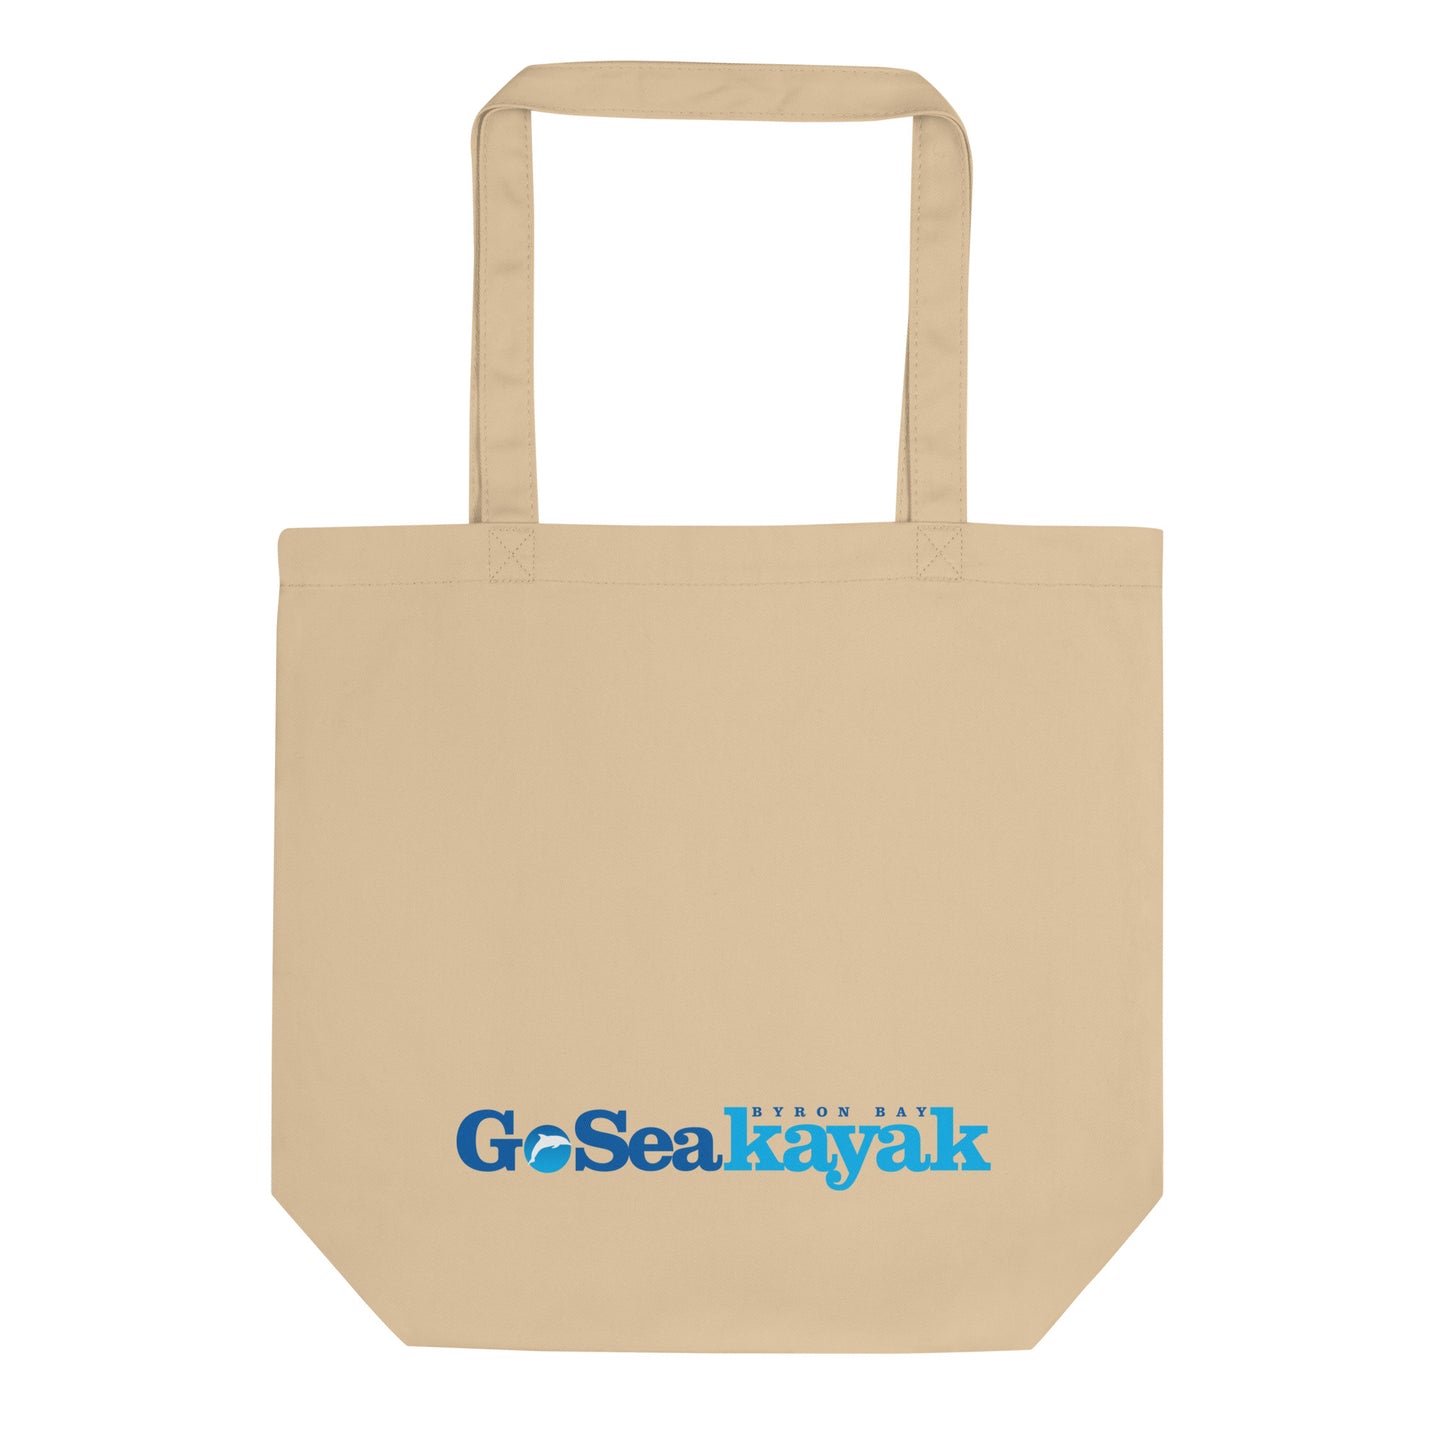  Eco Tote Bag - Natural Cream / Oyster Colour - Front view - With Go Sea Kayak Byron Bay logo on front - Genuine Byron Bay Merchandise | Produced by Go Sea Kayak Byron Bay 